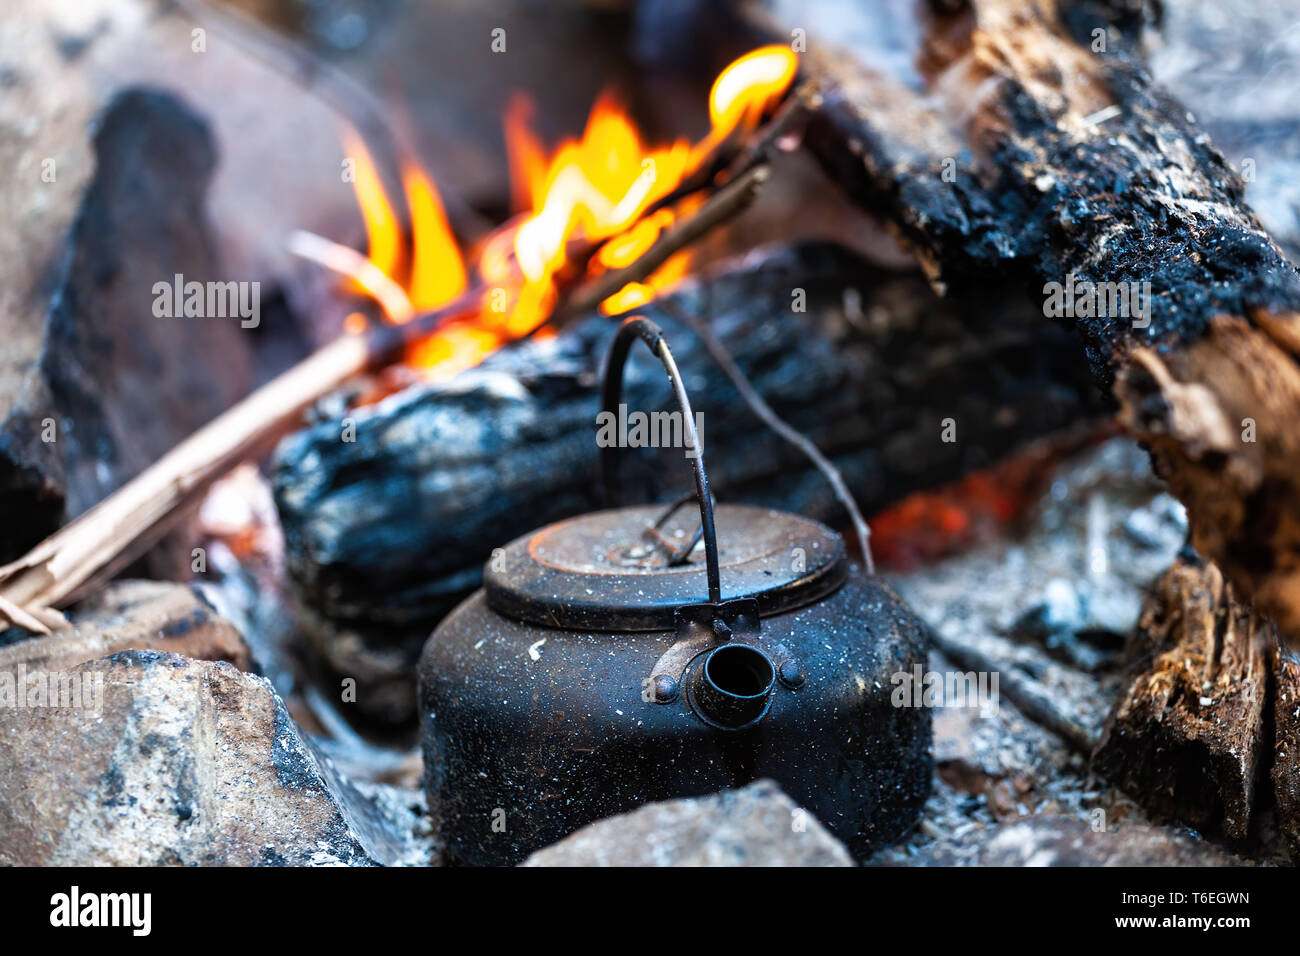 Campfire kettle closeup with blurred bonfire in the background Stock Photo  - Alamy